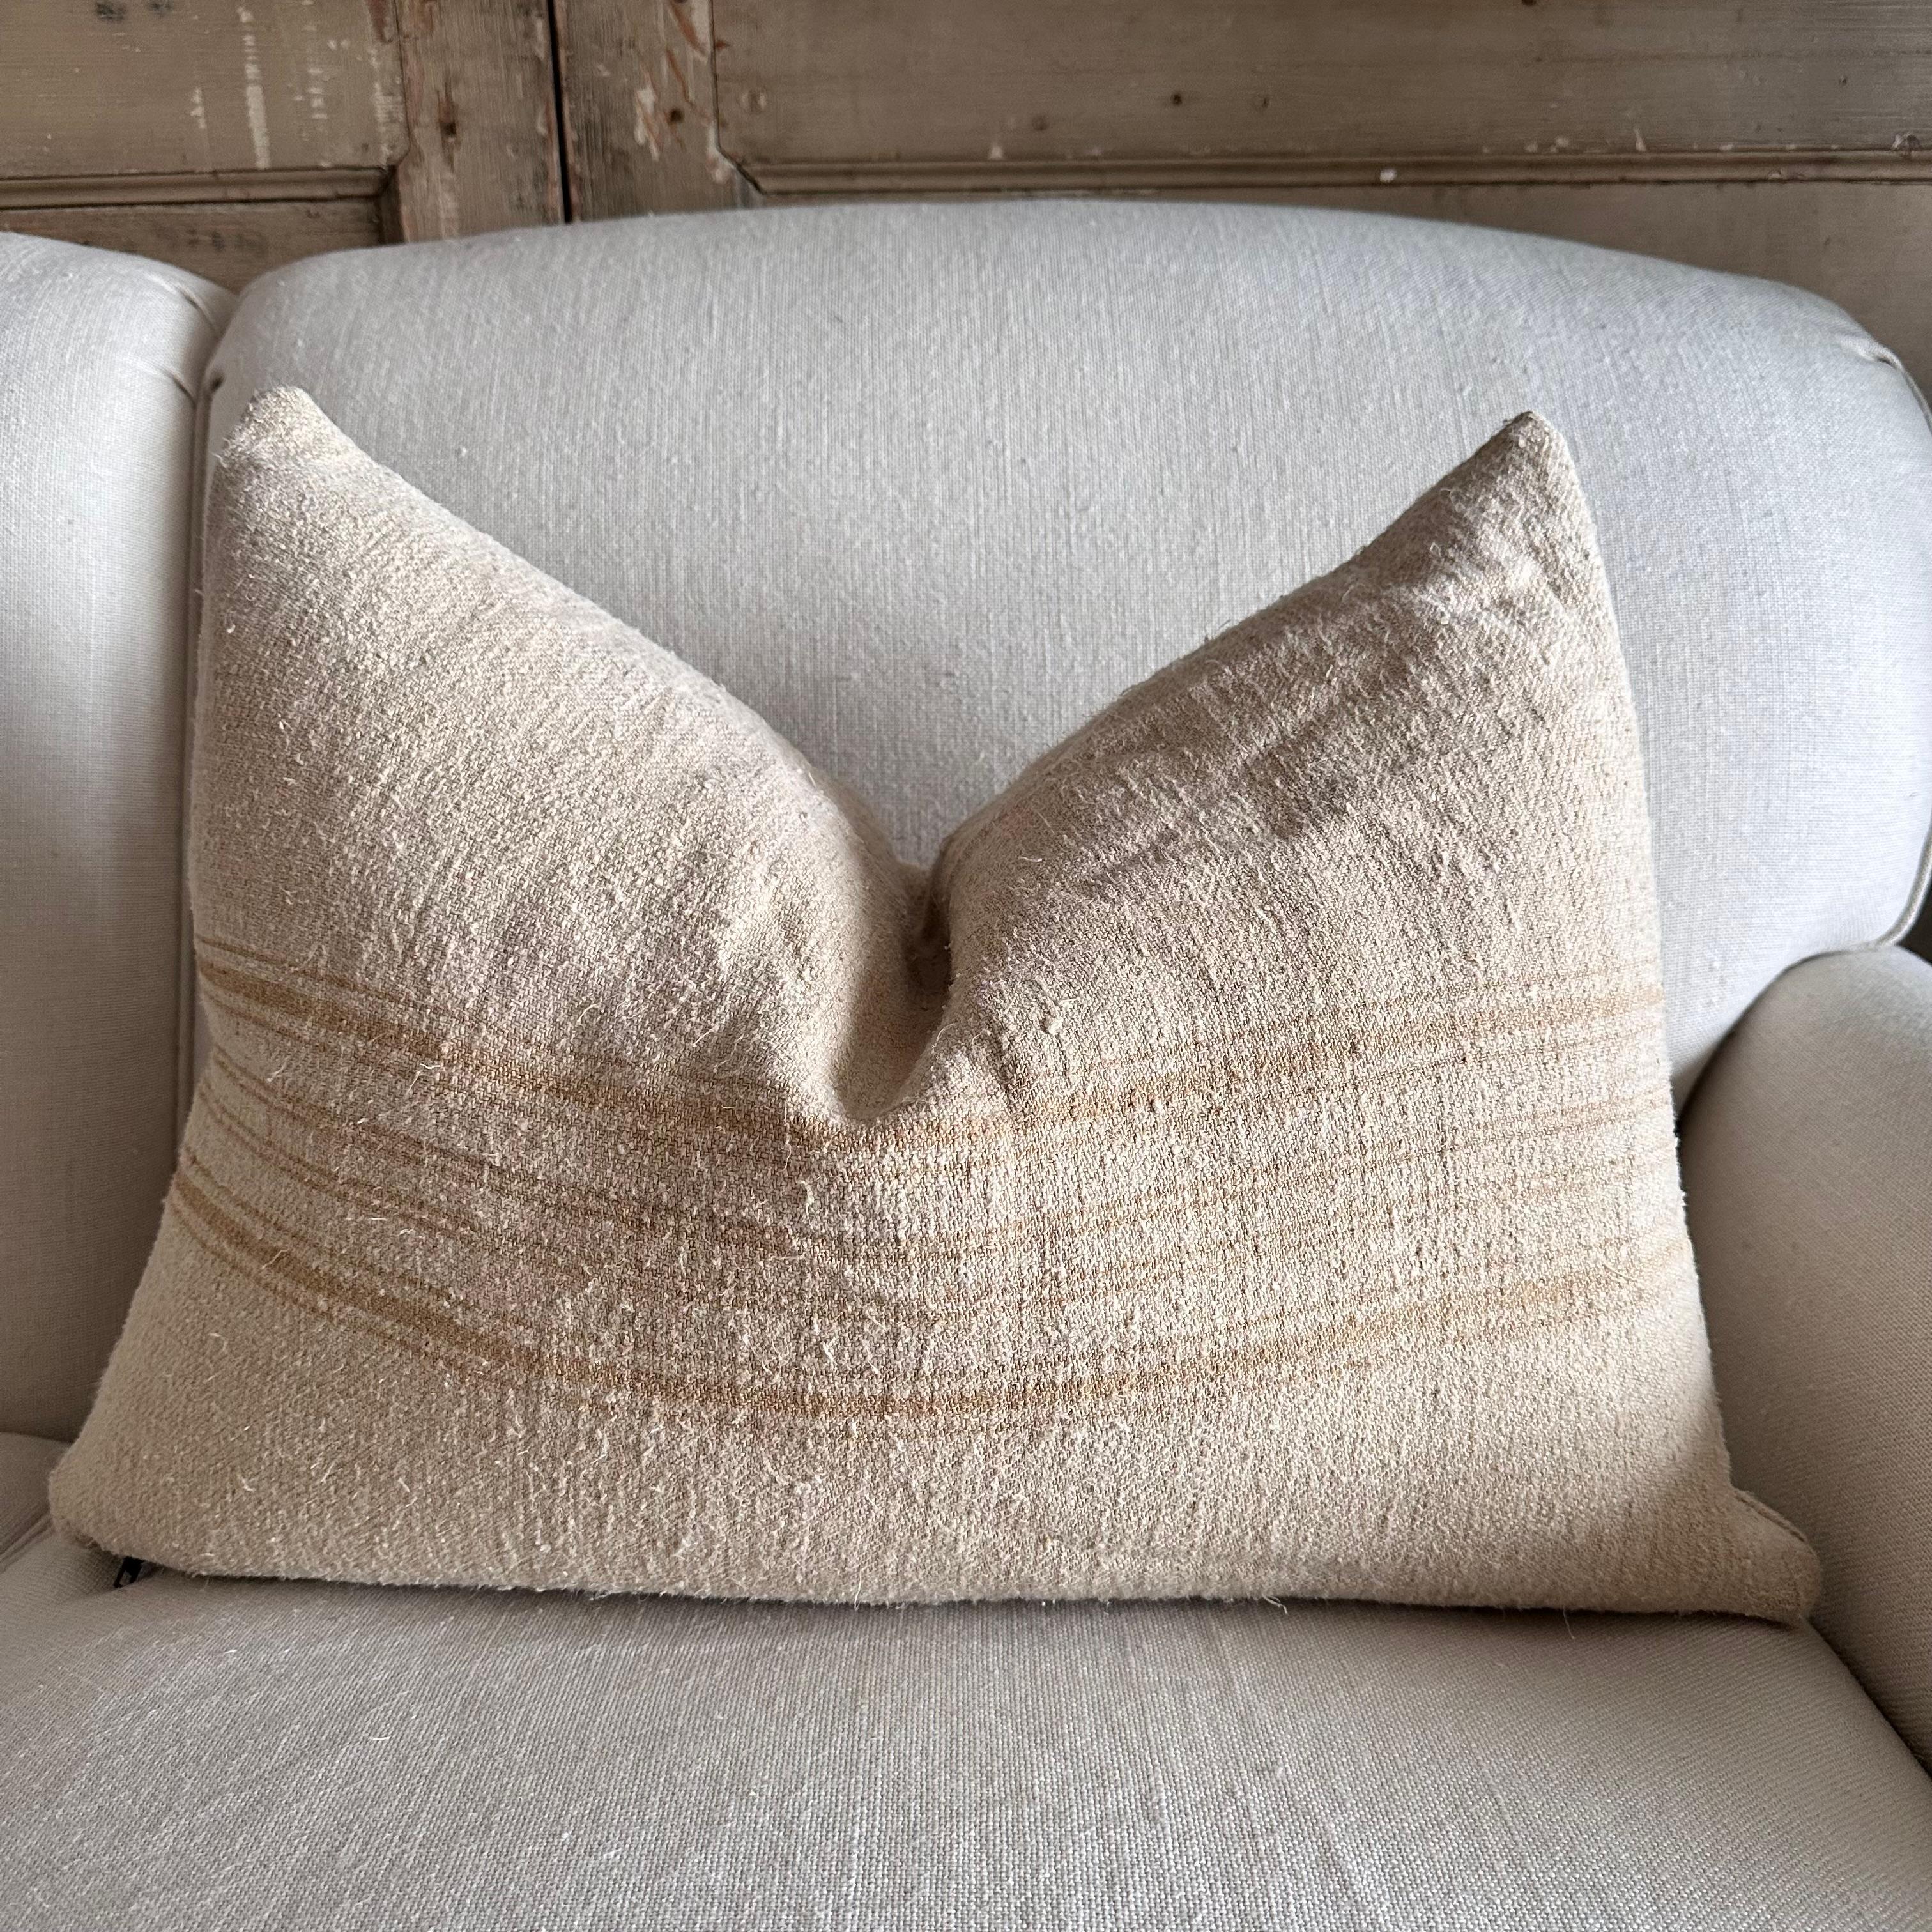 Cotton Antique French White Grain Linen Pillow with Insert